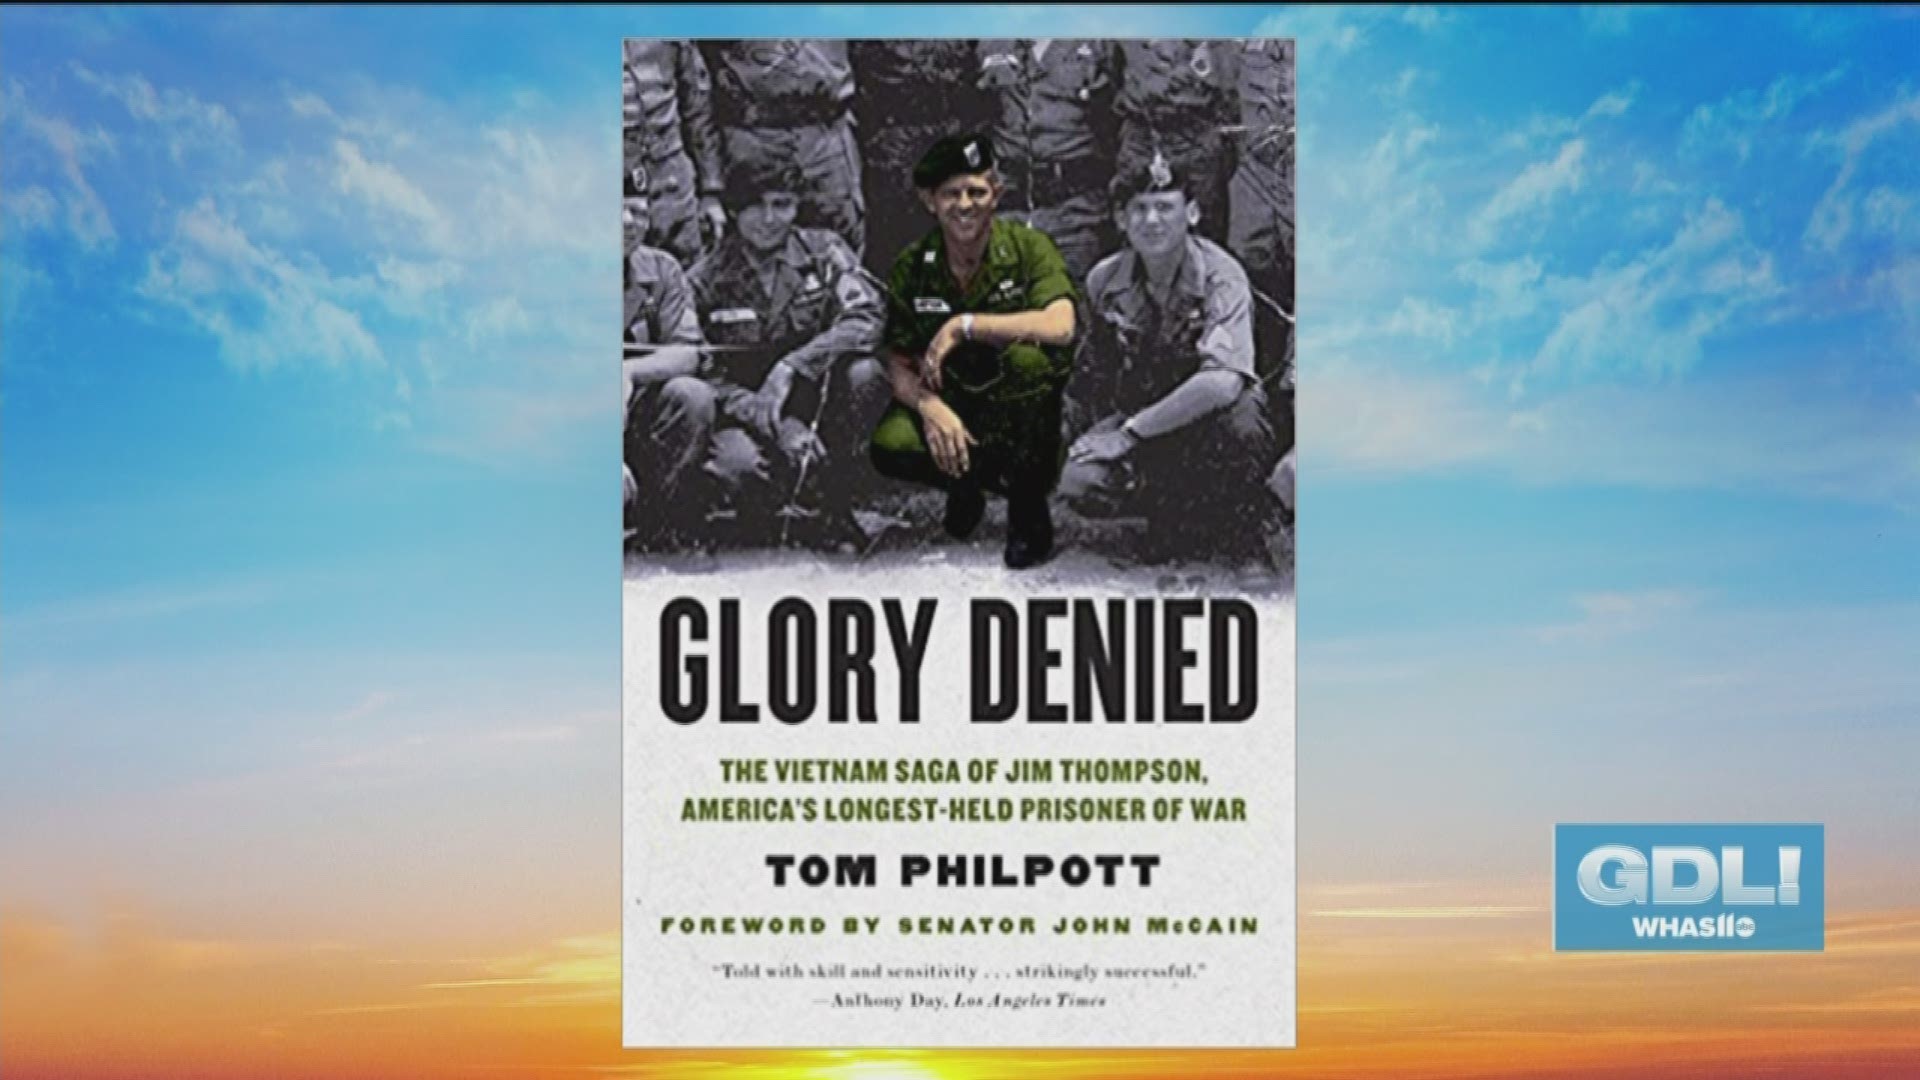 Kentucky Opera presents Glory Denied Nov. 8 at 8 PM and Nov. 10, 2019 at 2 PM at the Brown Theatre, which is located at 315 W. Broadway in Louisville, KY.